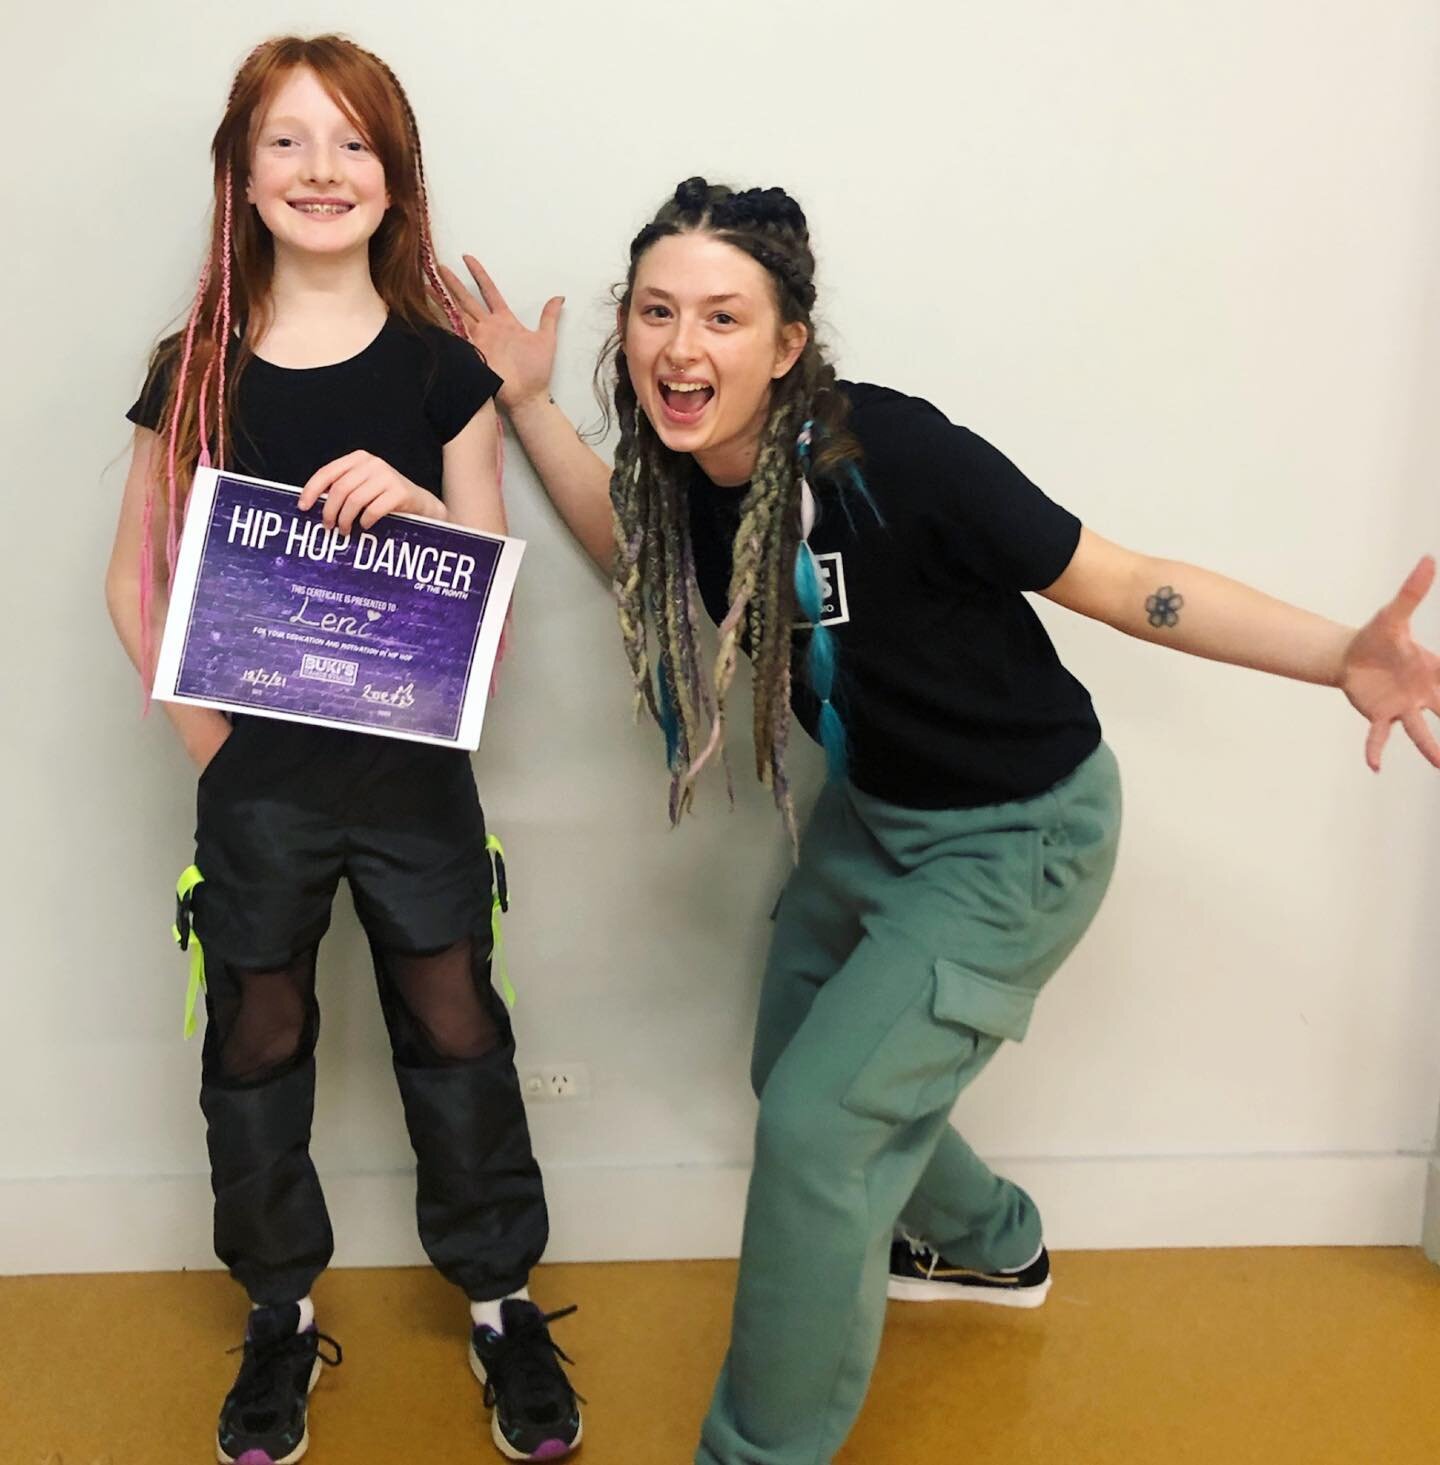 WOOH! Amazing Leni is our student of the month for June! 🥳💜 This lil&rsquo; lady has been killin&rsquo; it in the dance room, and her instructor Zoe couldn&rsquo;t be more proud 🤩💜 Keep it up Leni! 🥳
-
-
-
-
-
-
-
-
-
-
 #hiphop #hiphopdance #hi